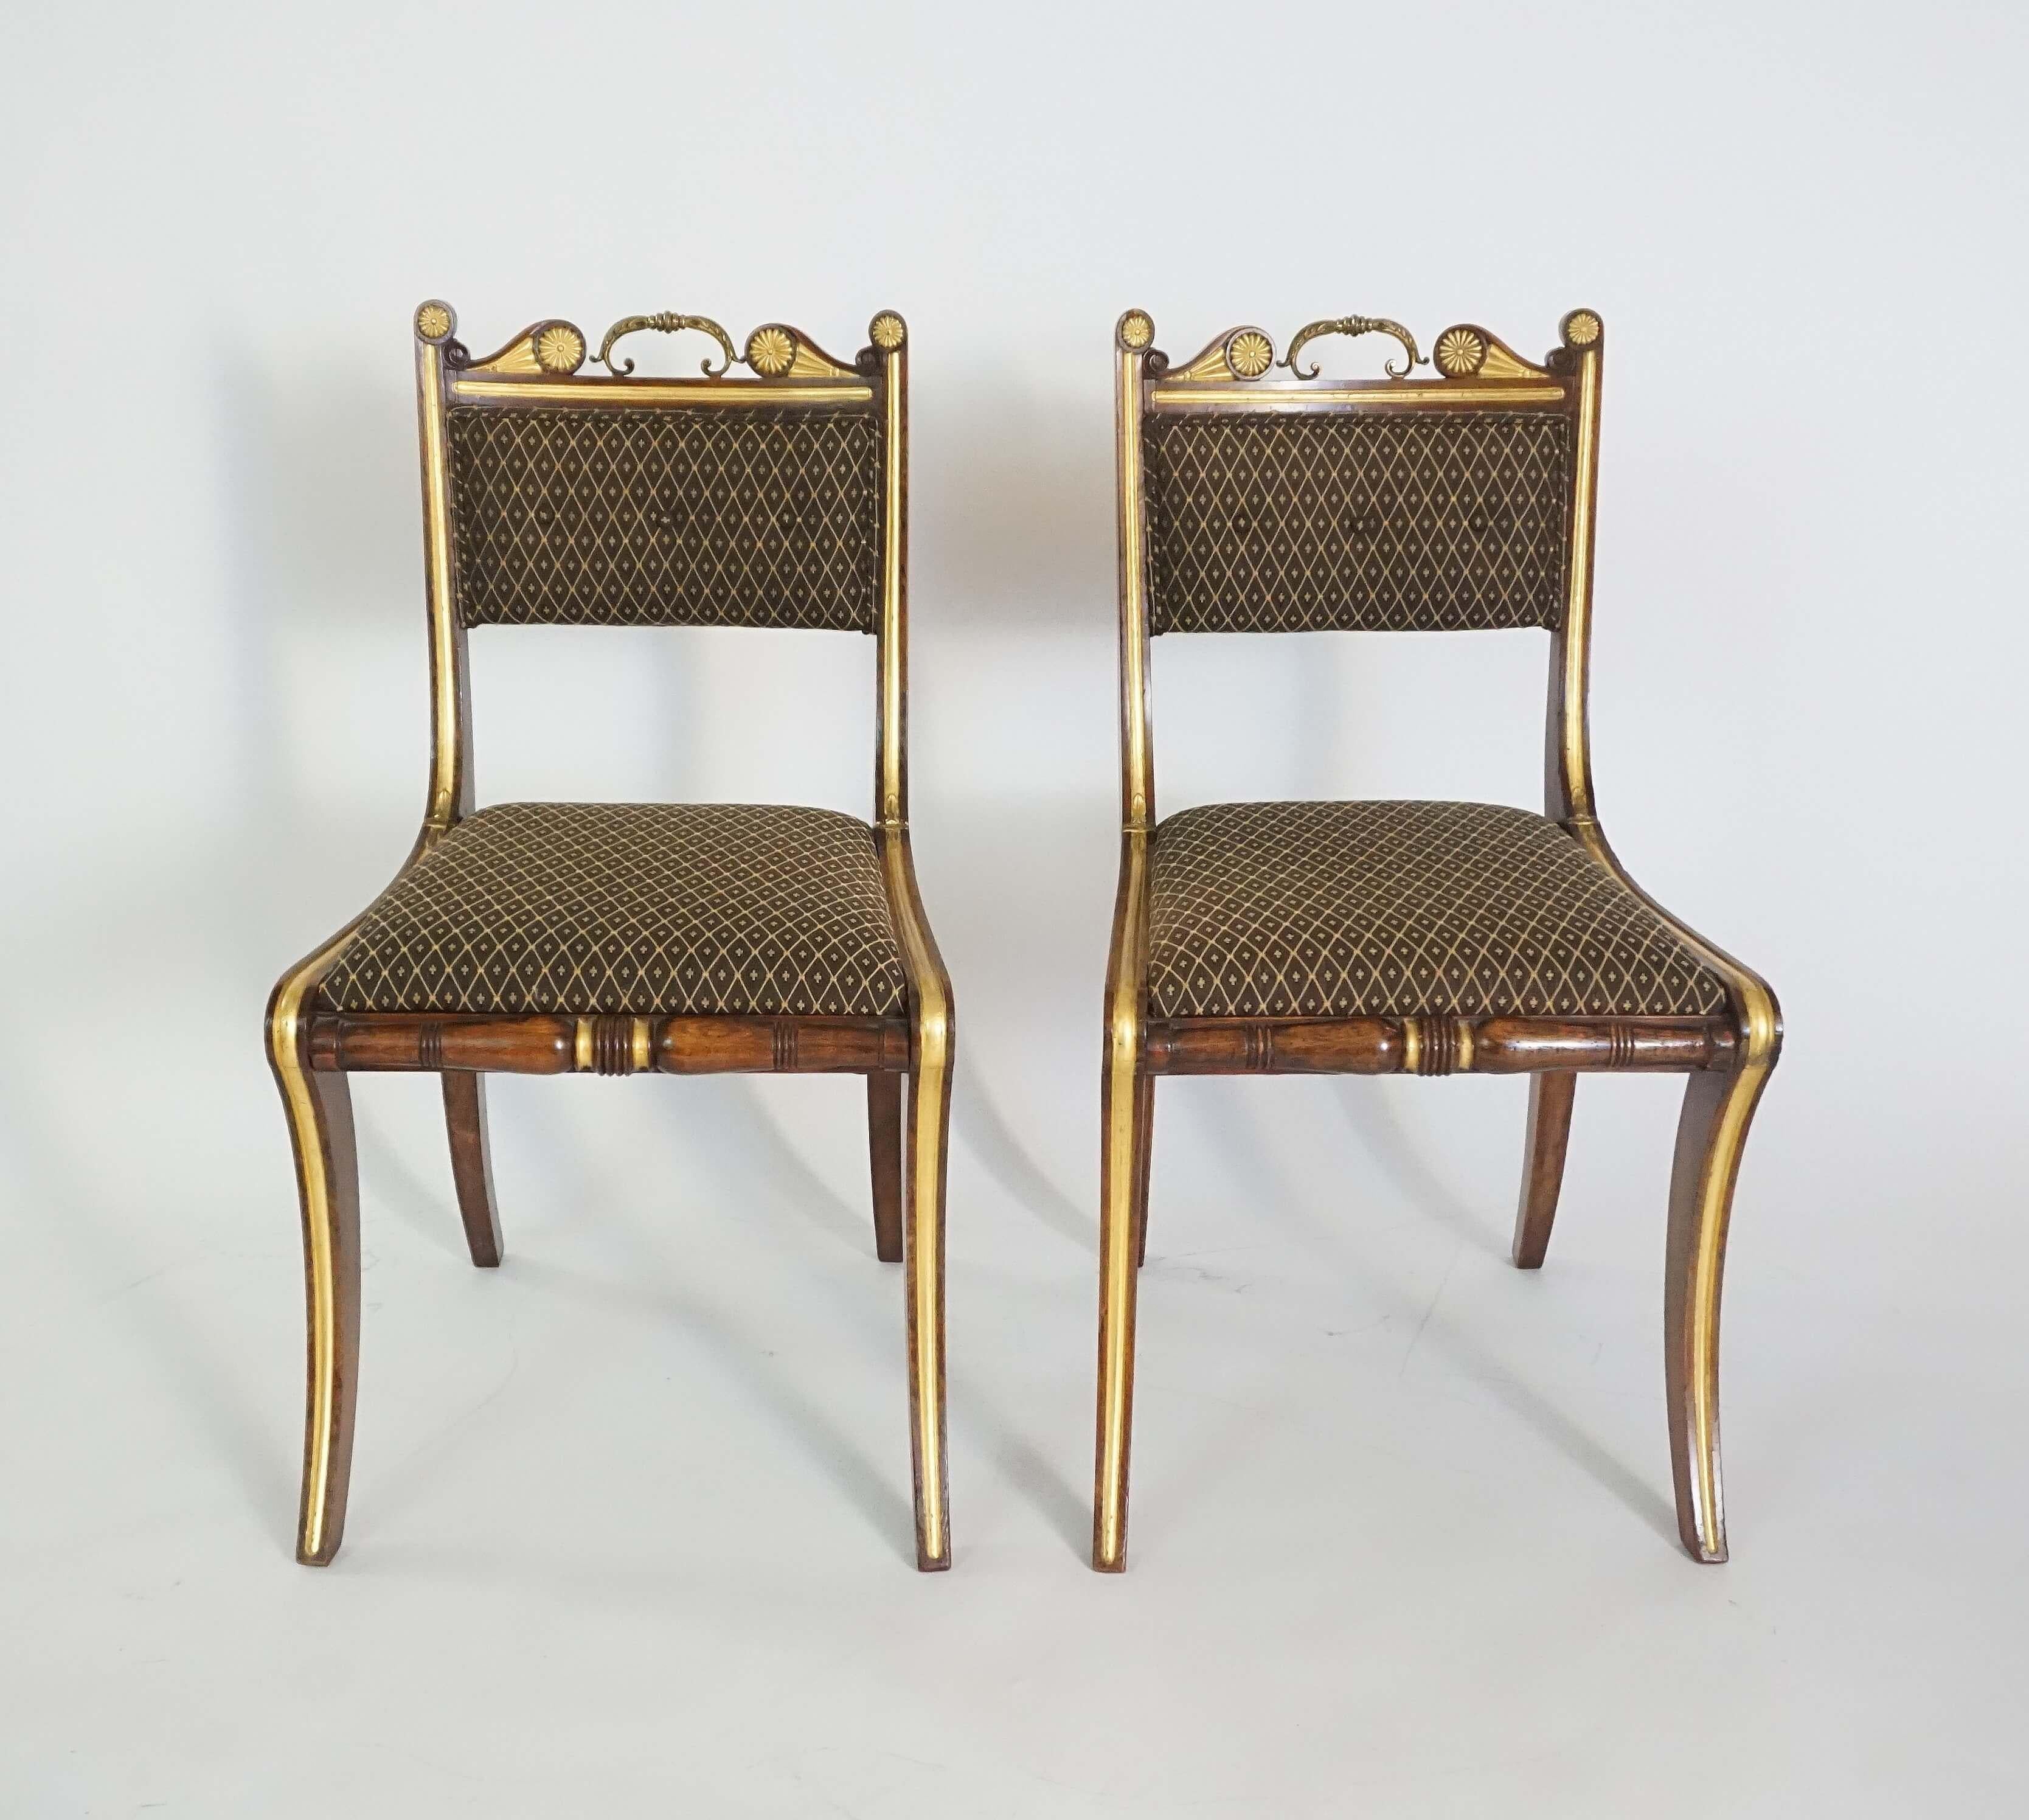 Pair of circa 1815 English Regency period side chairs attributed to renowned cabinetmakers Morel & Hughes having parcel-gilt and gilt-metal mounted rosewood 'klismos-form' frames; the crest-rail with original gilt metal 'butler's pull' above